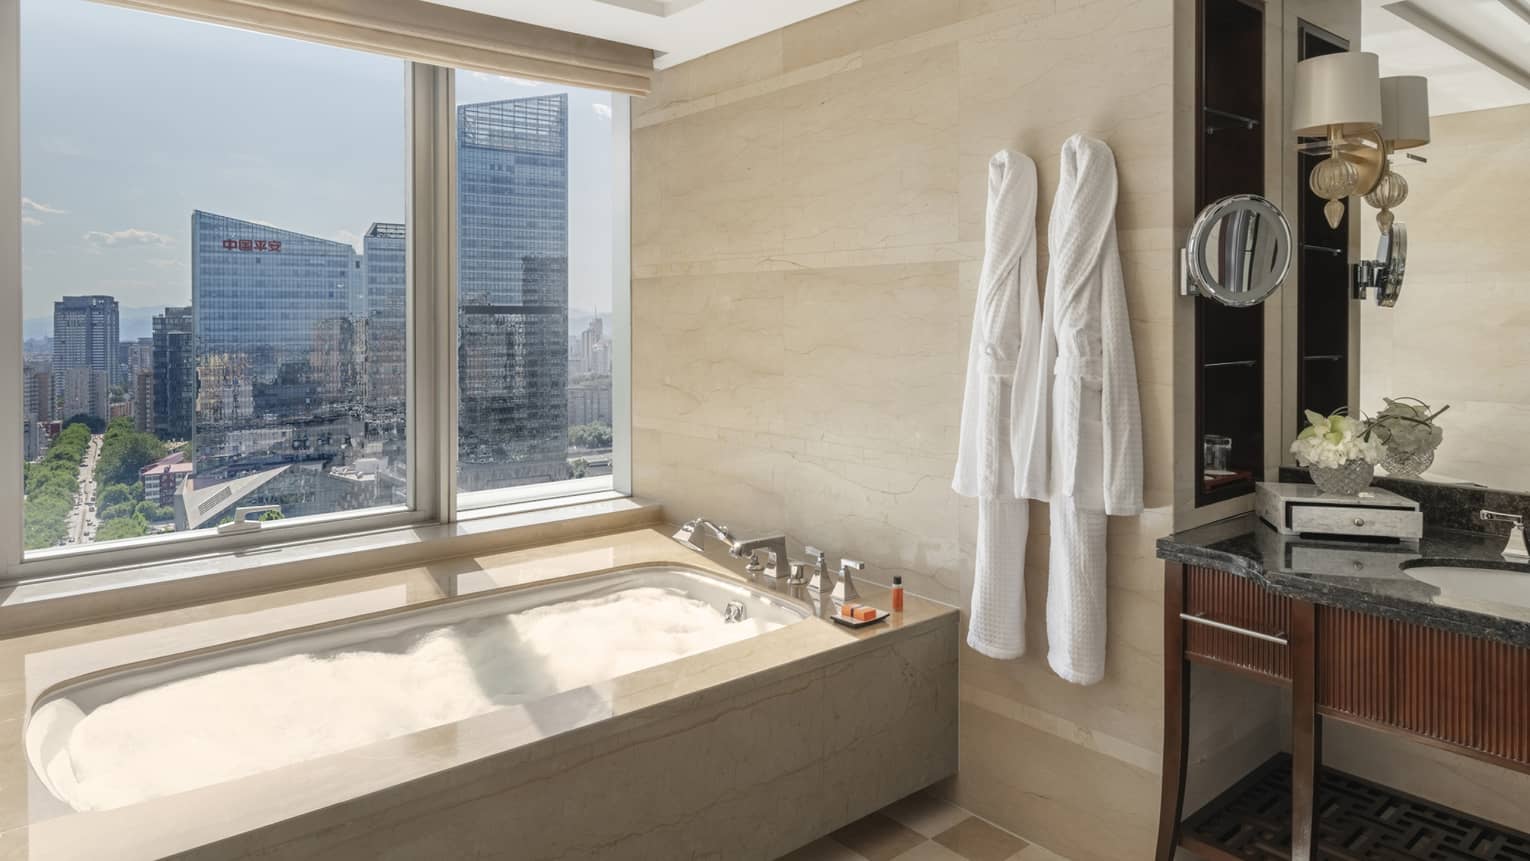 Bathroom with tan and white tile floor, two robes hanging on wall hooks, and a windowside tub